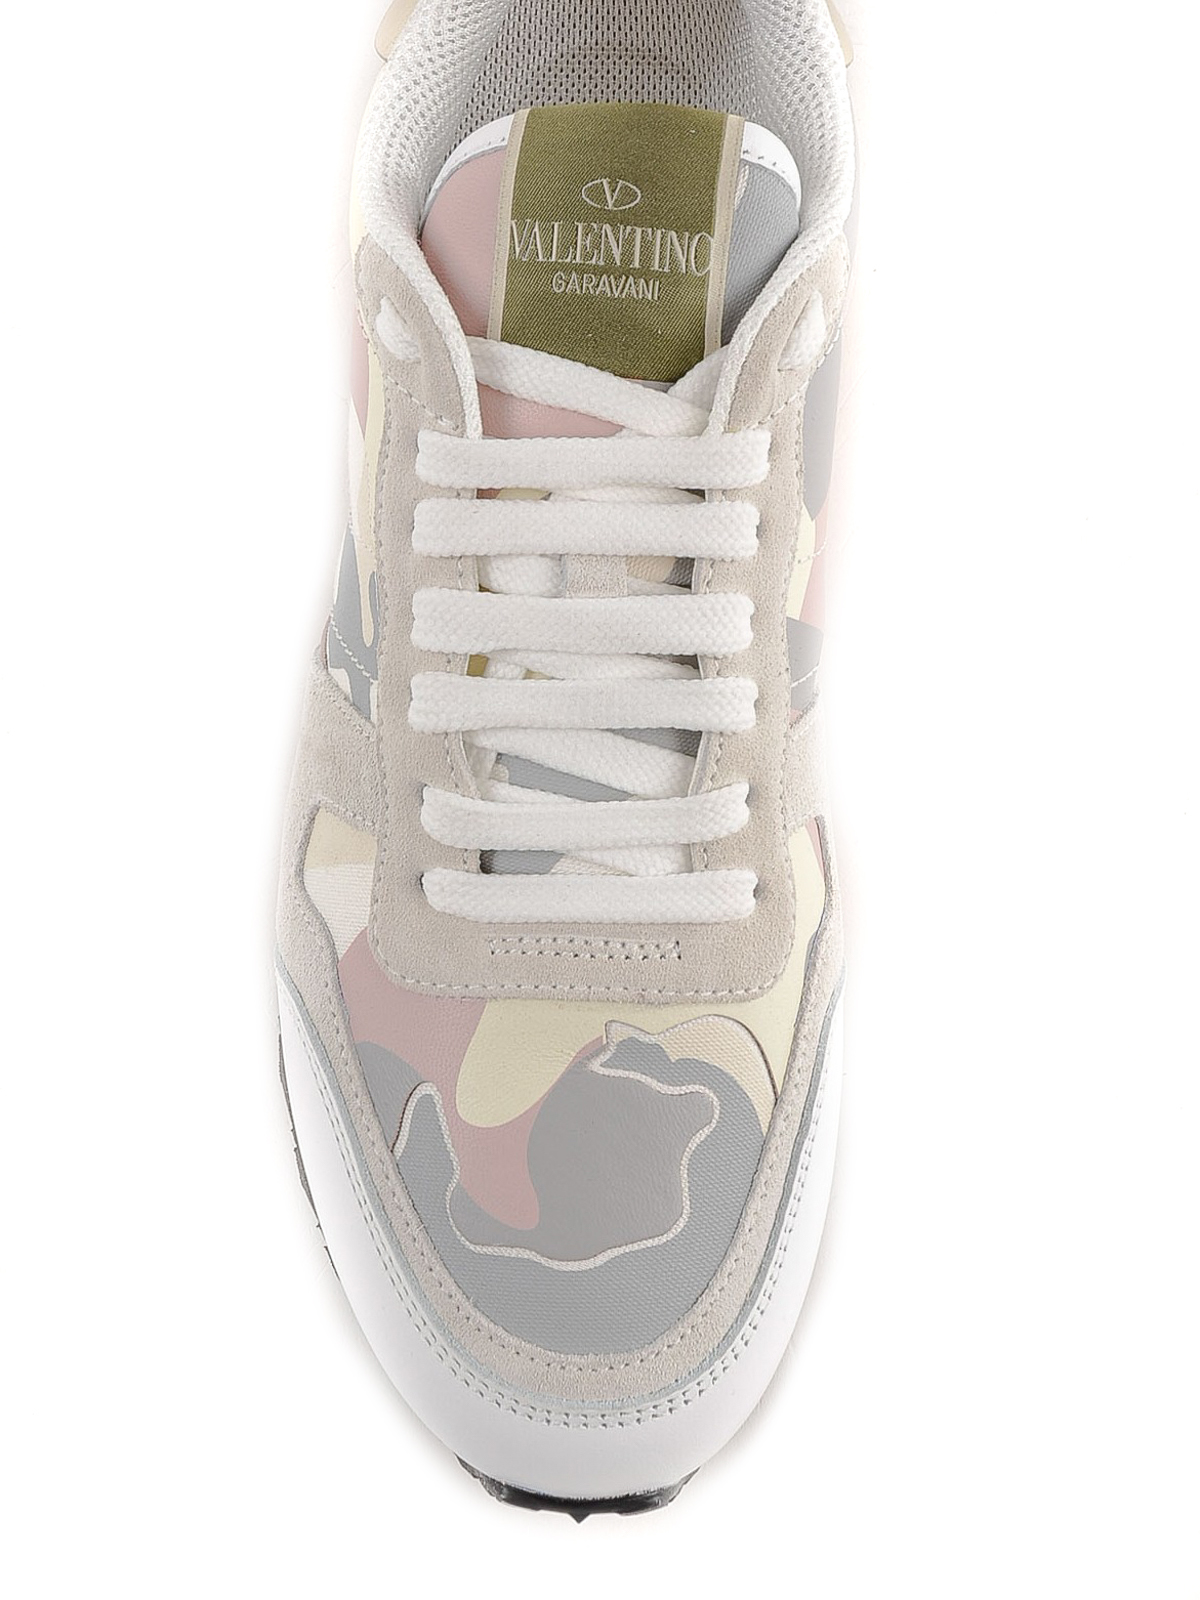 valentino camouflage sneakers pink